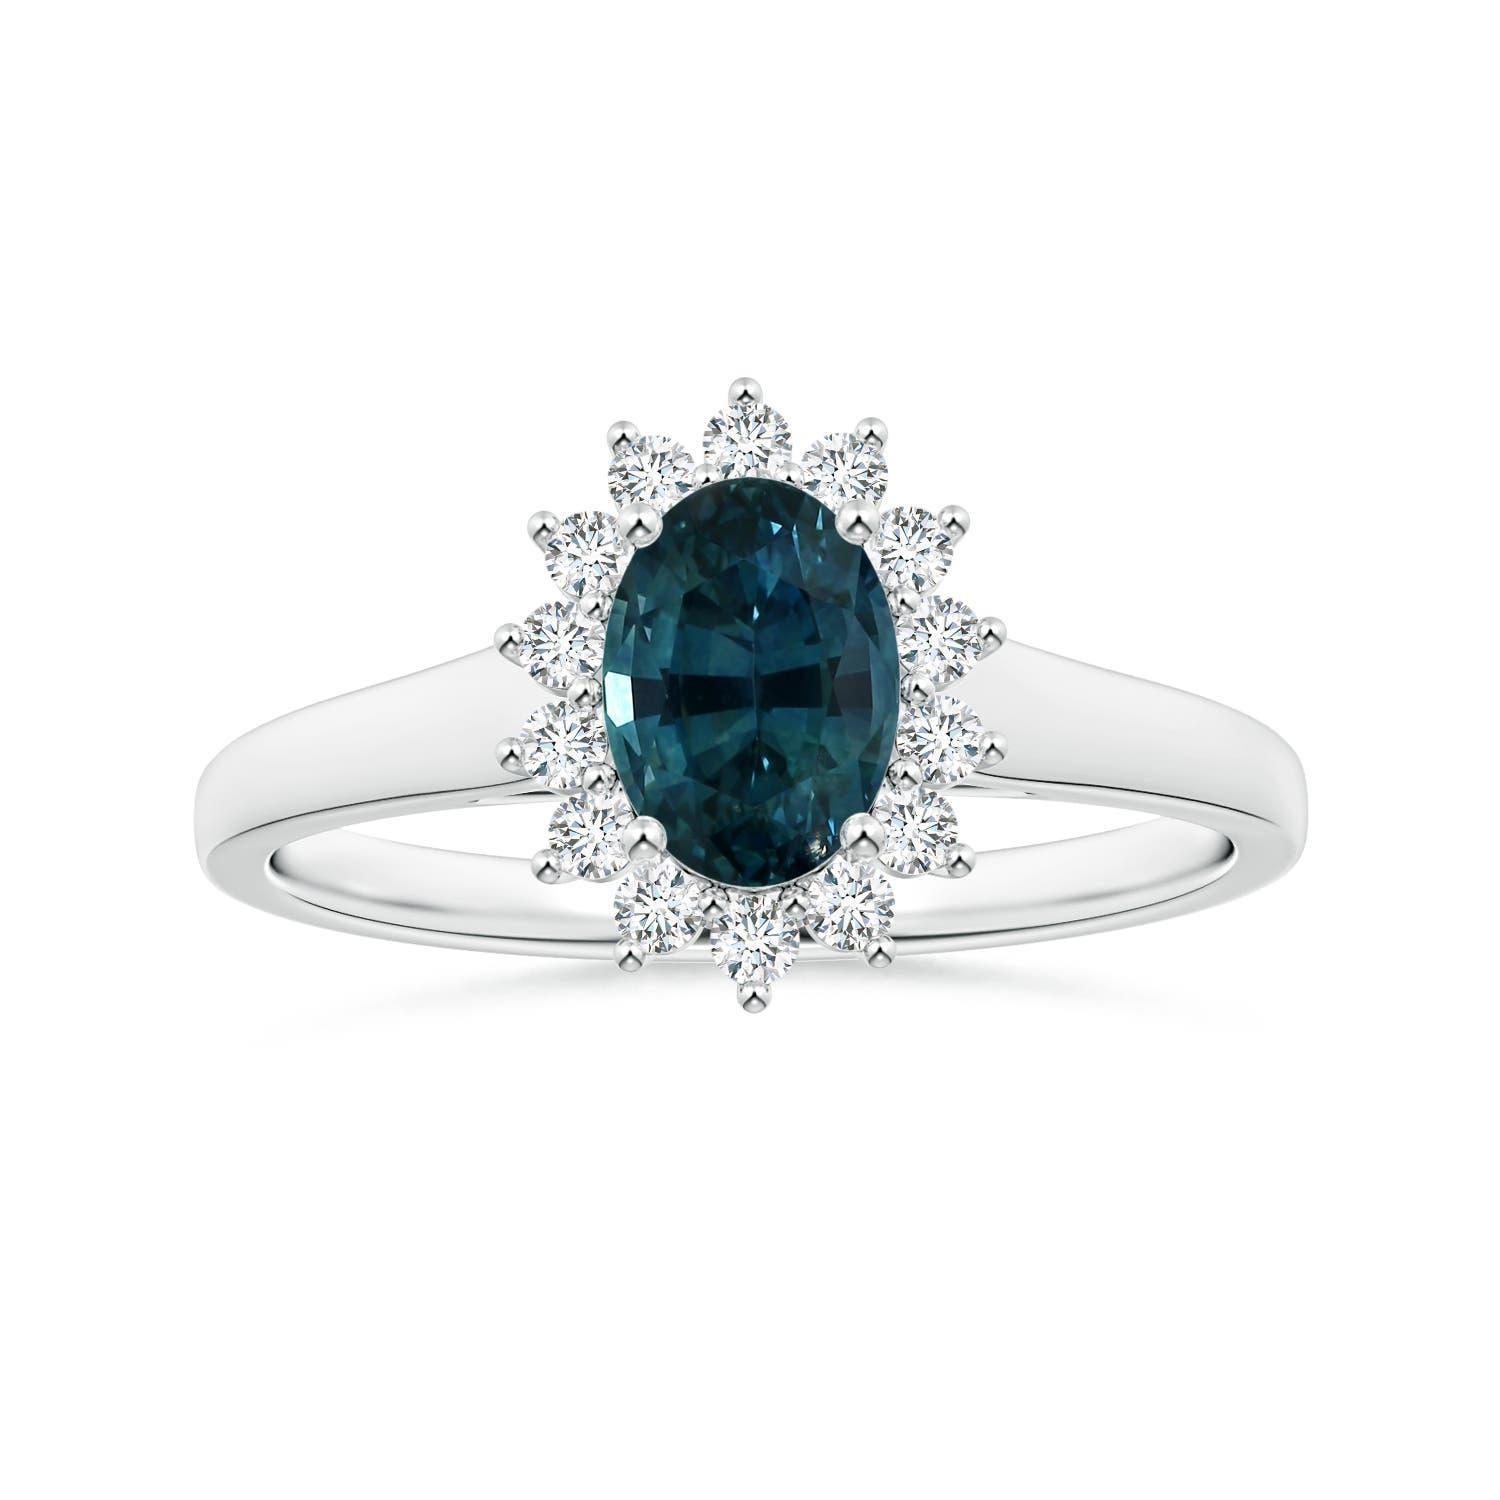 For Sale:  Angara Gia Certified Teal Sapphire Tapered Ring in White Gold with Halo